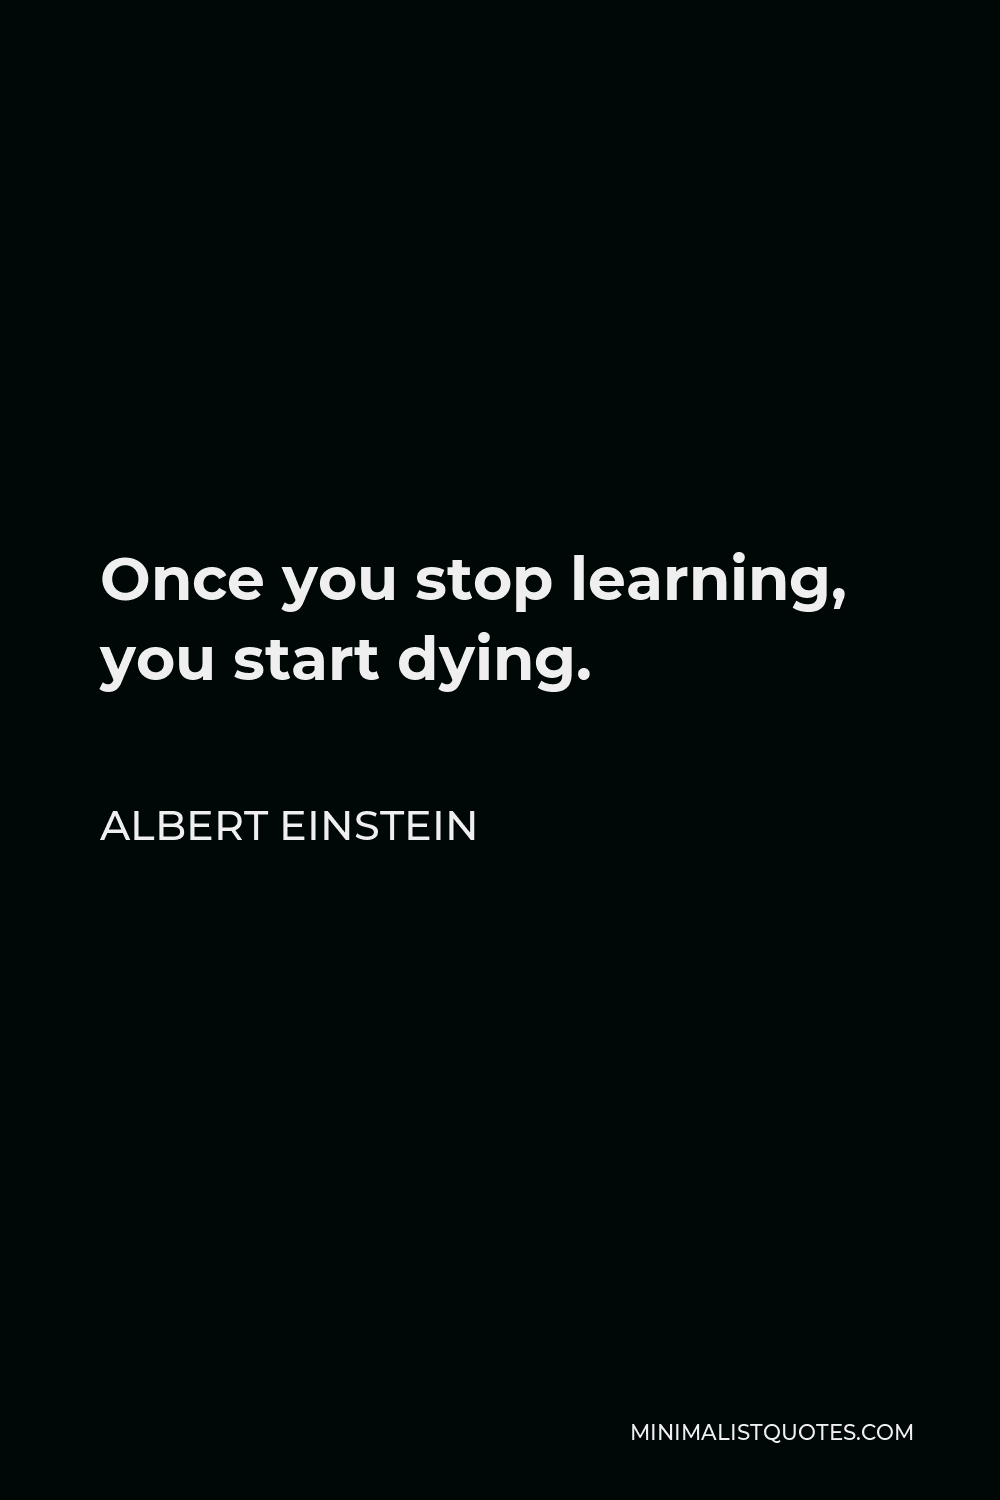 Albert Einstein Quote - Once you stop learning, you start dying.